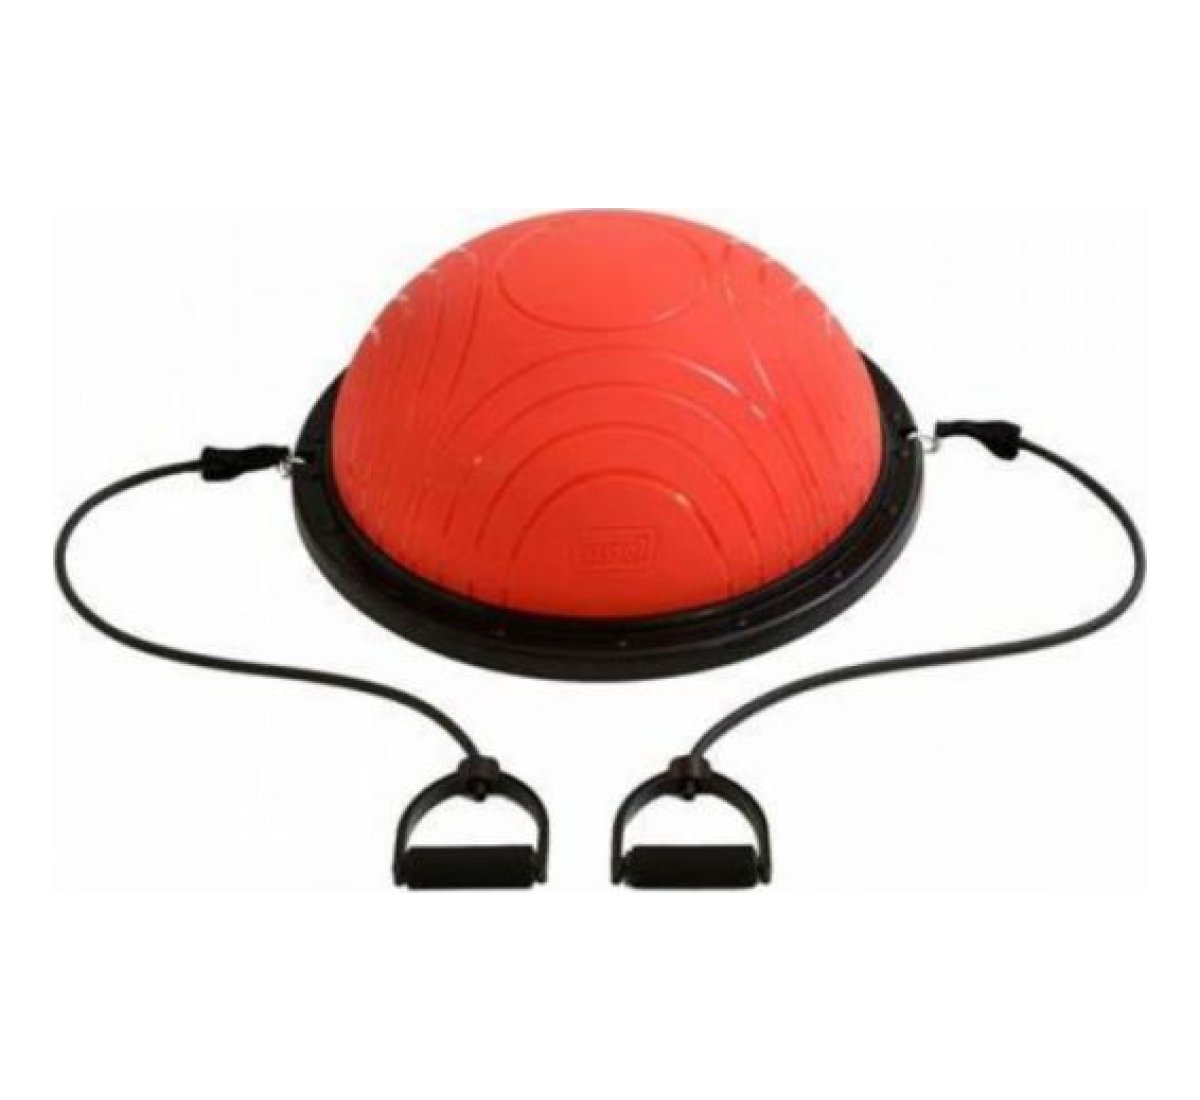 SISSEL FIT-Dome Sport - Multifunctionele fitness tool